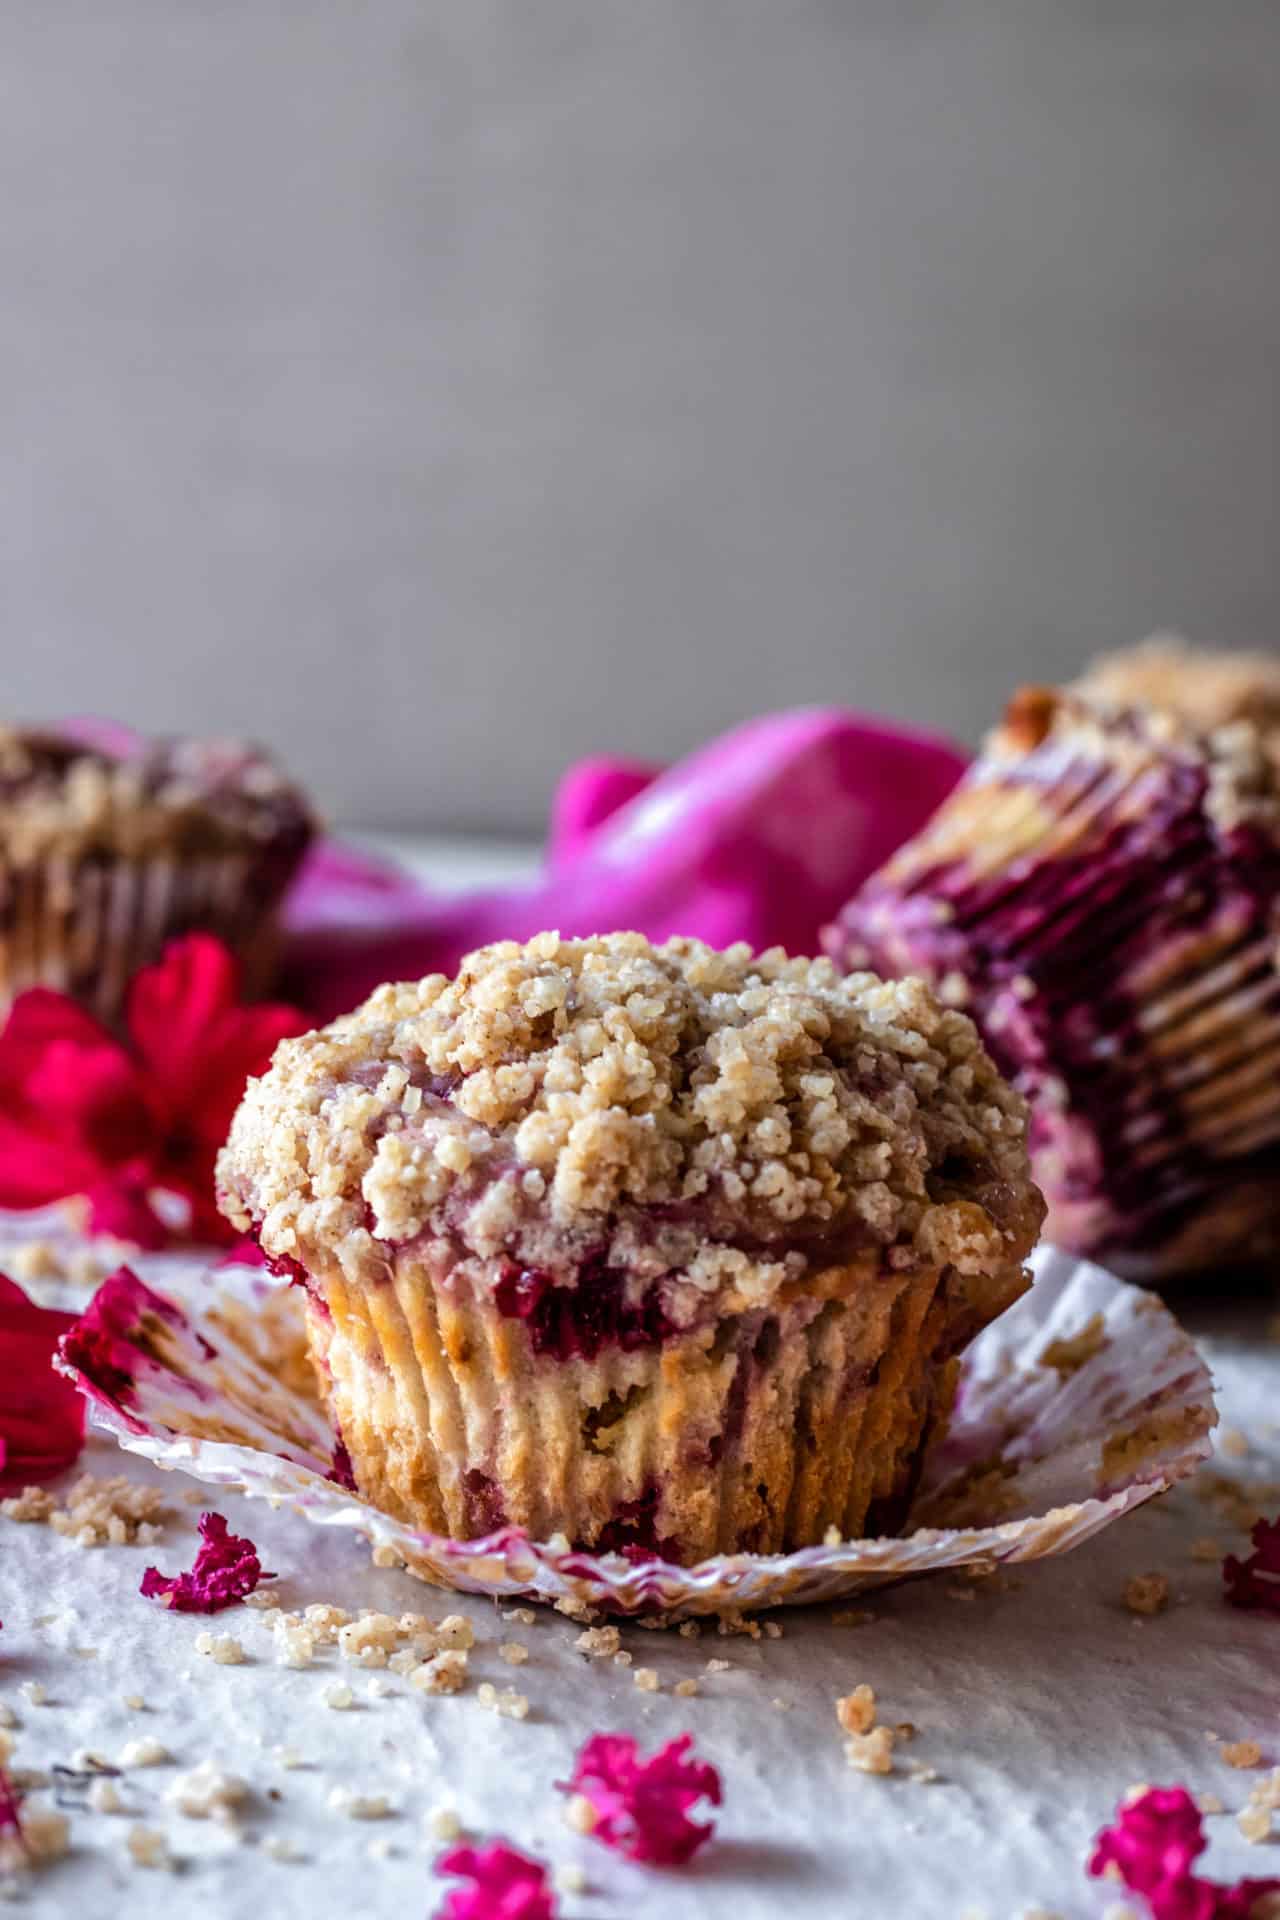 These Gluten-Free Raspberry White Chocolate Streusel Muffins are perfectly sweetened, crumbly on the top, flavorful, packed with raspberry flavor, hearty and so delicious!